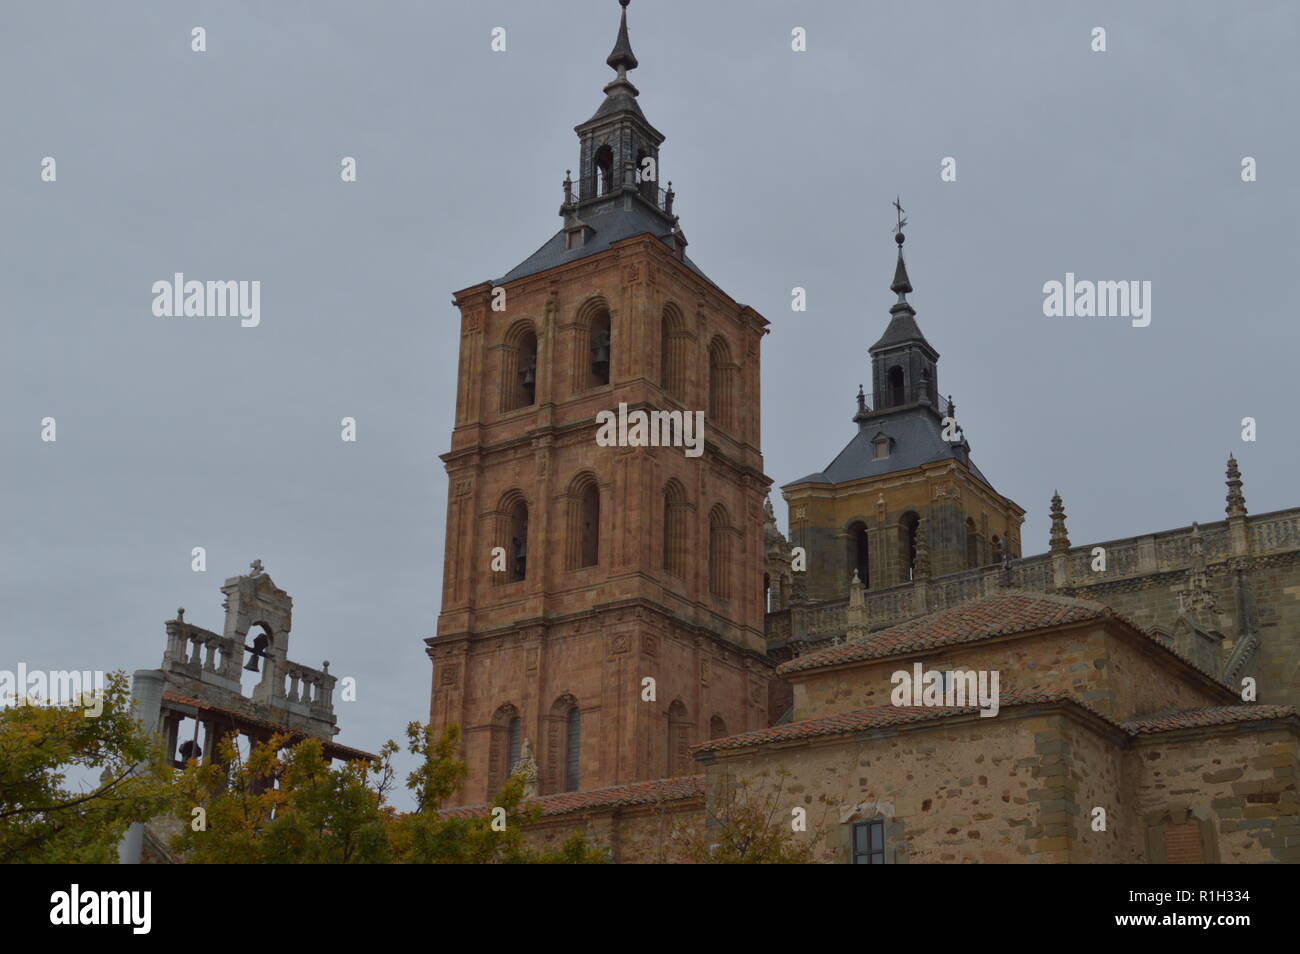 Bell Tower Of The Cathedral In Astorga. Architecture, History, Camino De Santiago, Travel, Street Photography. November 1, 2018. Astorga, Leon, Castil Stock Photo